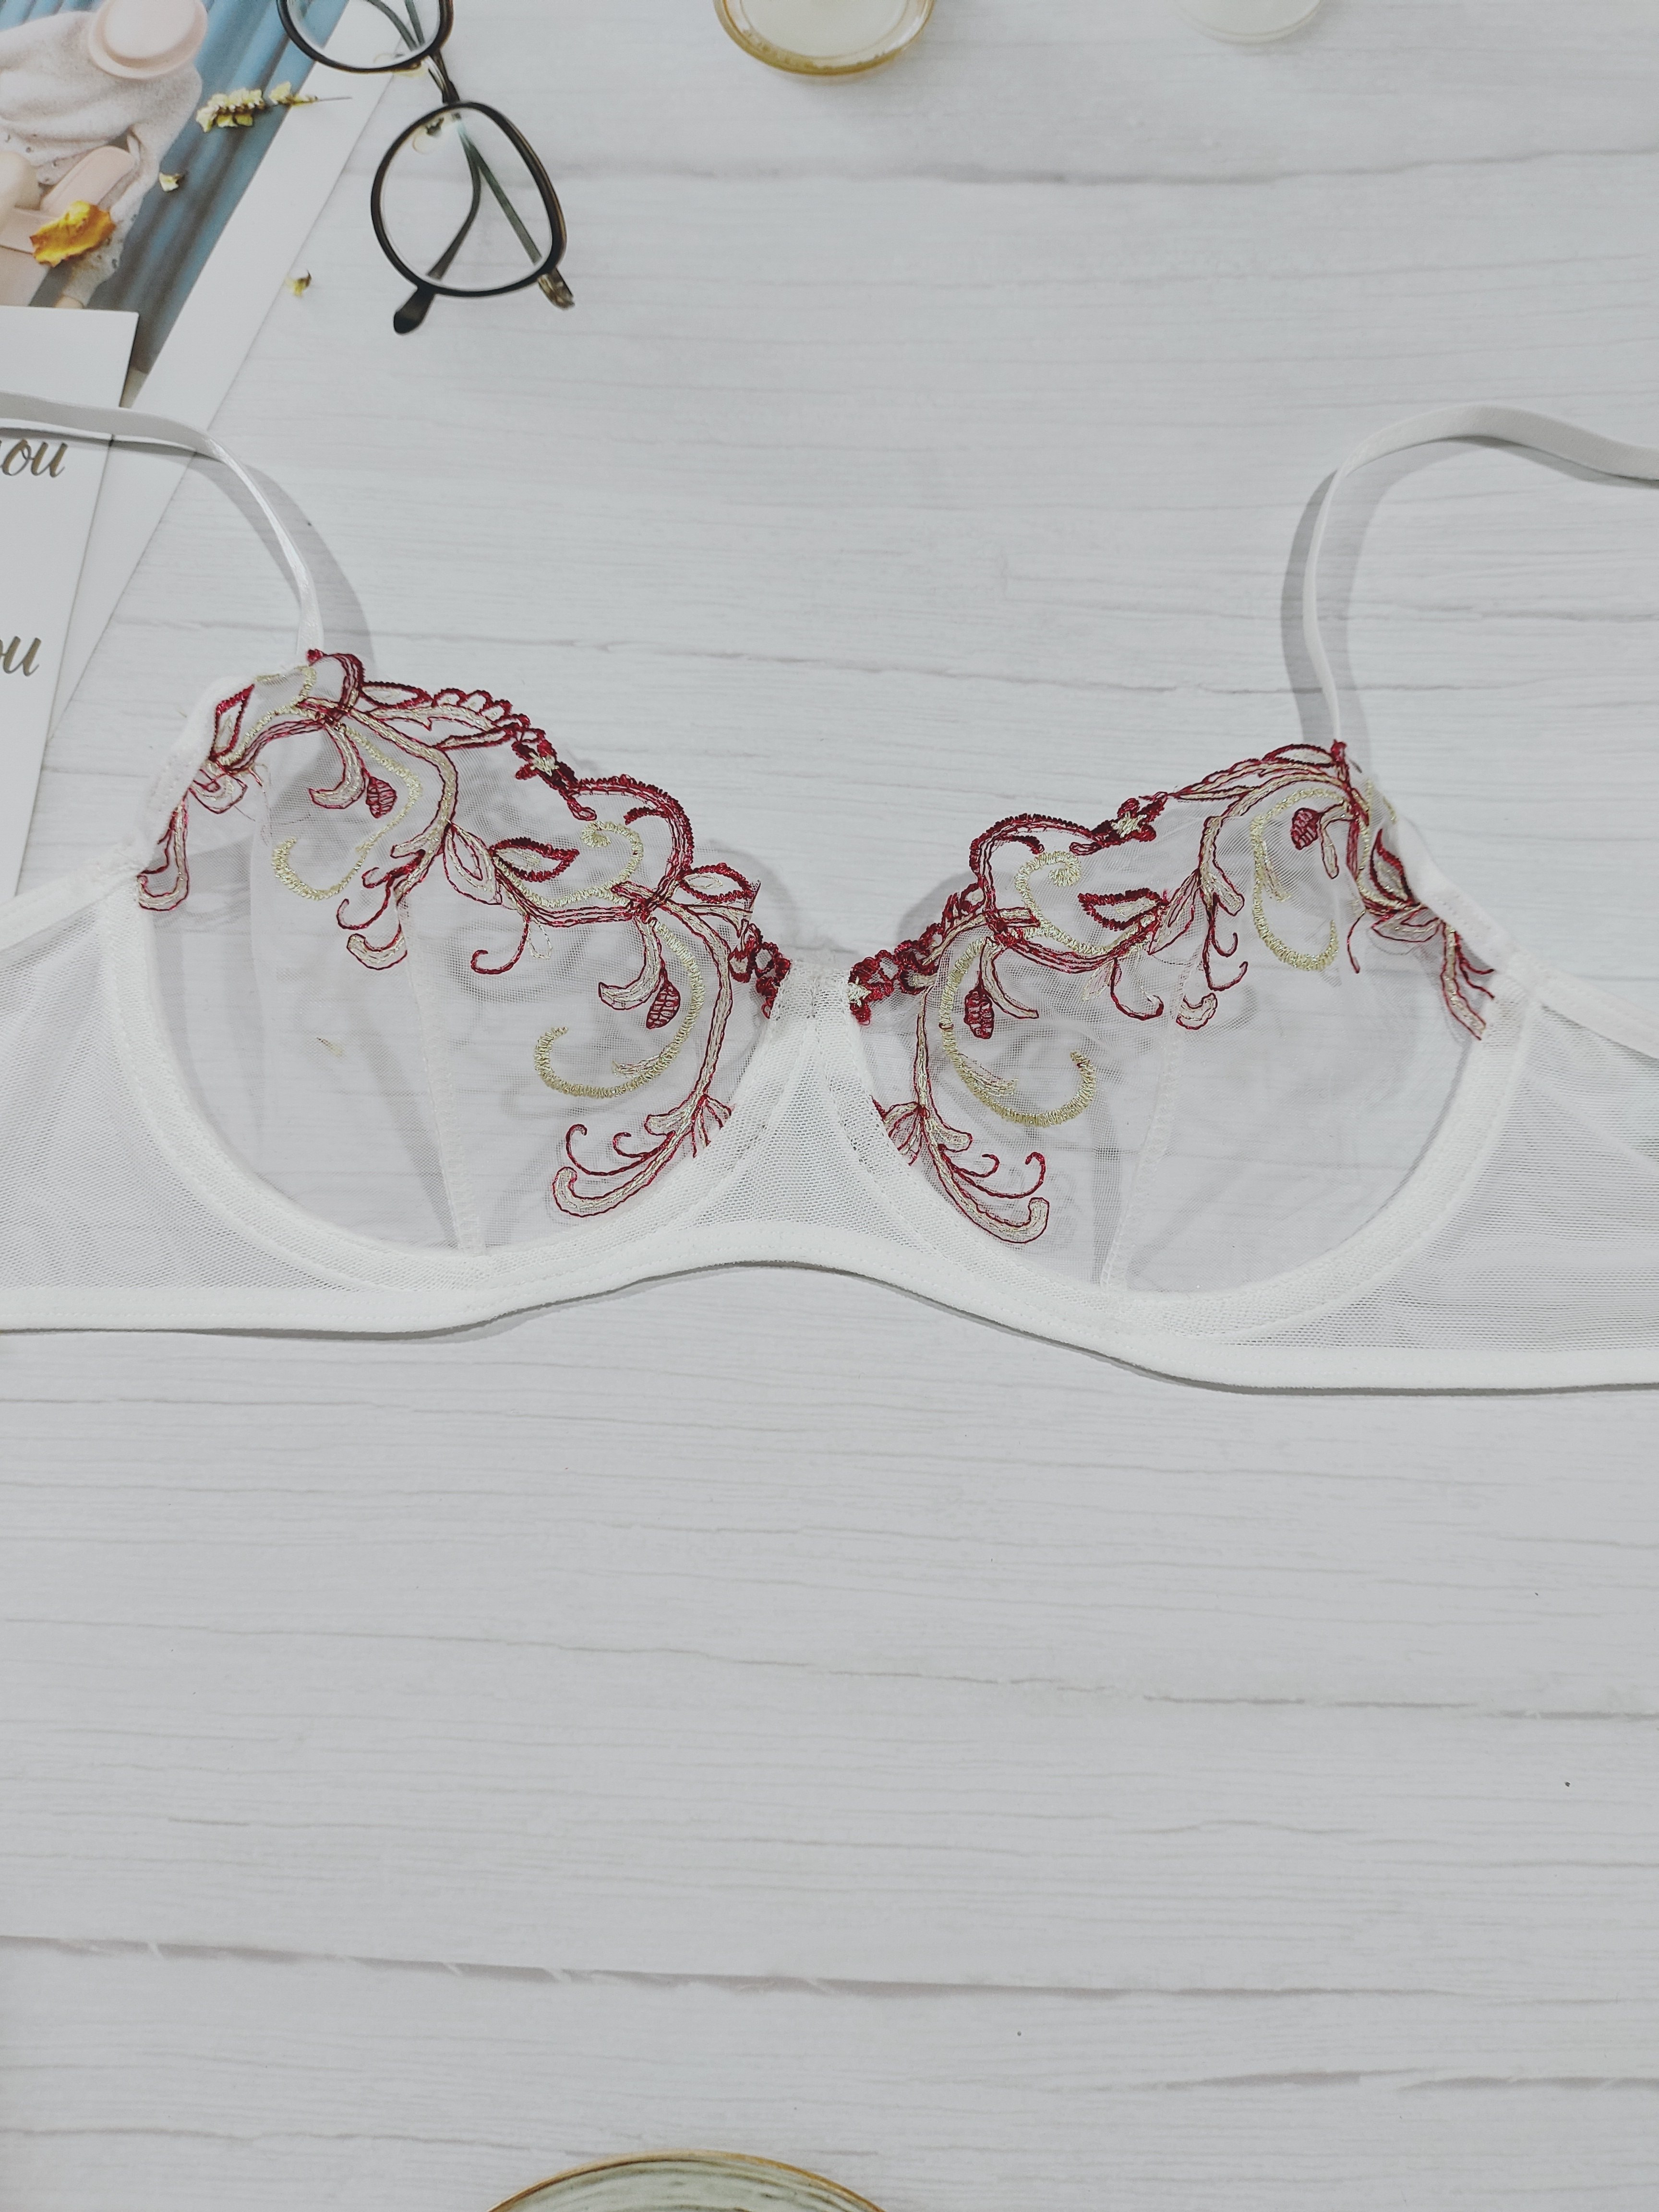 Romantic Floral Embroidery Lingerie Set - Sheer Bra And Mesh Thong